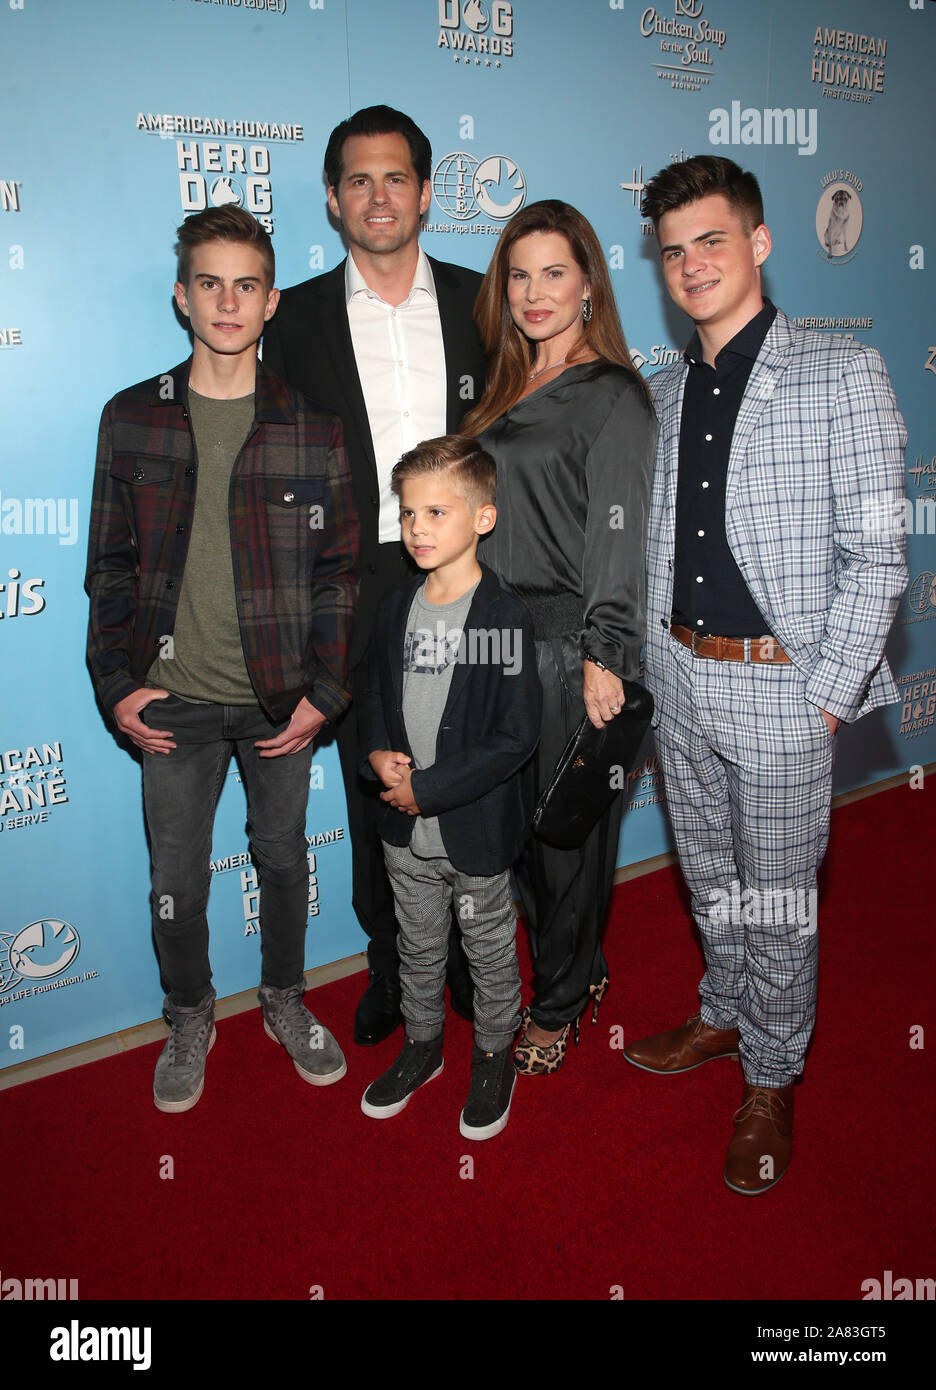 9th Annual American Humane Hero Dog Awards Featuring: Kristoffer Polaha, Julianne Morris, Micah Polaha, Kristoffer Caleb Polaha, Jude Polaha Where: Beverly Hills, California, United States When: 06 Oct 2019 Credit: FayesVision/WENN.com Stock Photo